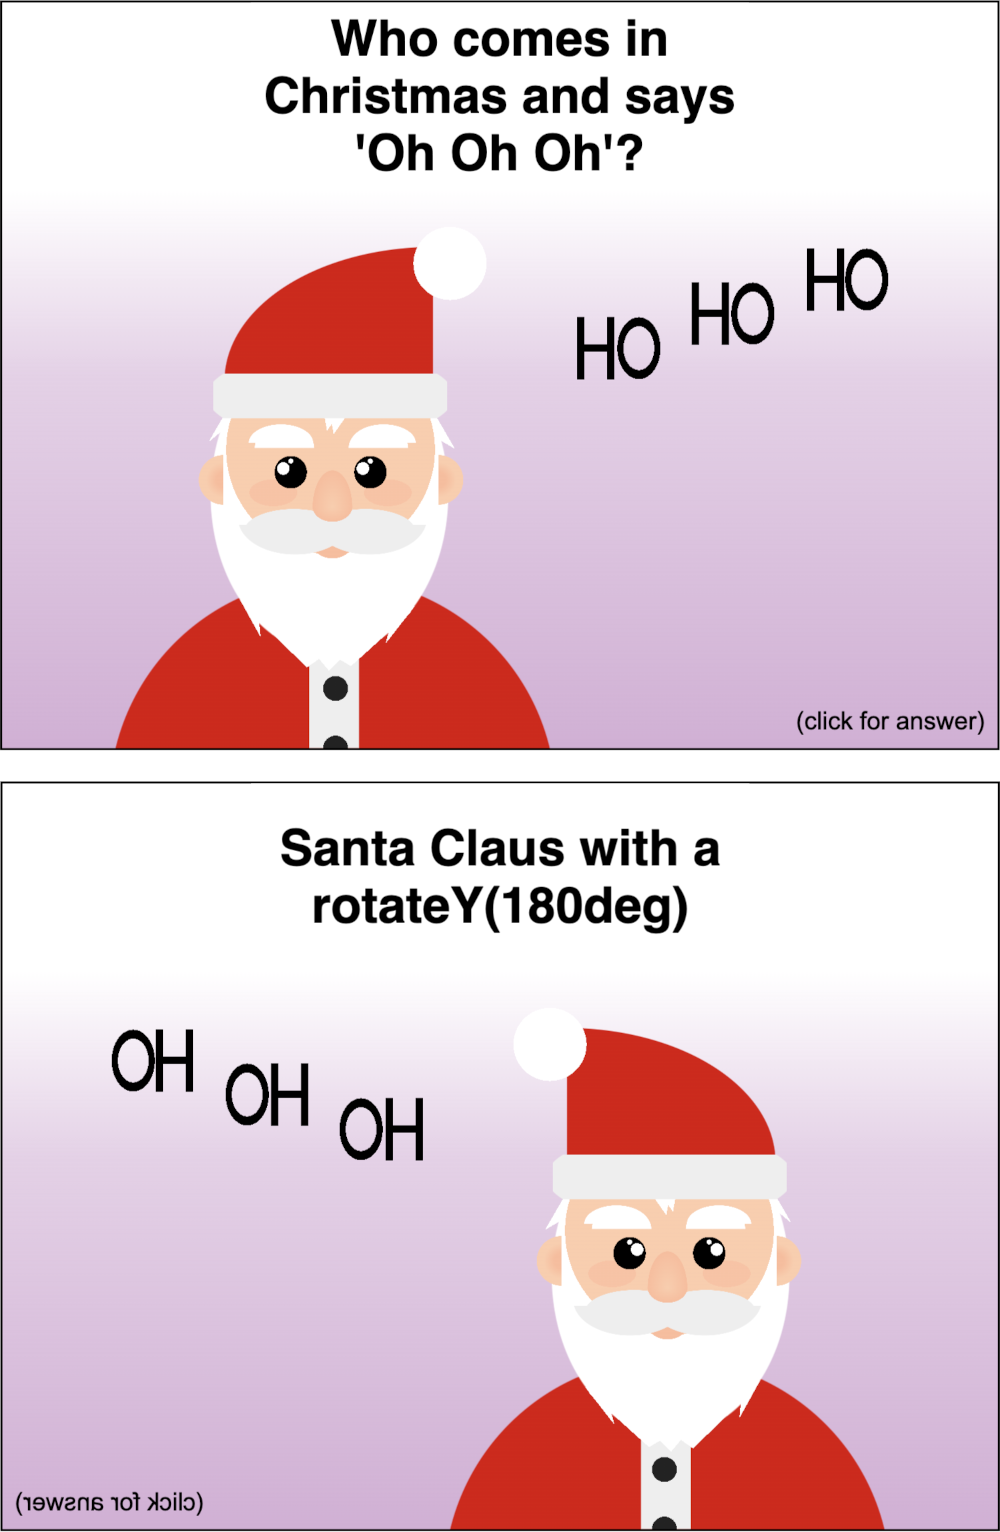 Card with a cartoon of Santa Claus and the question 'Who comes in Christmas and says Oh Oh Oh?' Clicking/tapping on the card will flip it 180 degrees revealing the answer: Santa Claus with a rotateY(180deg)